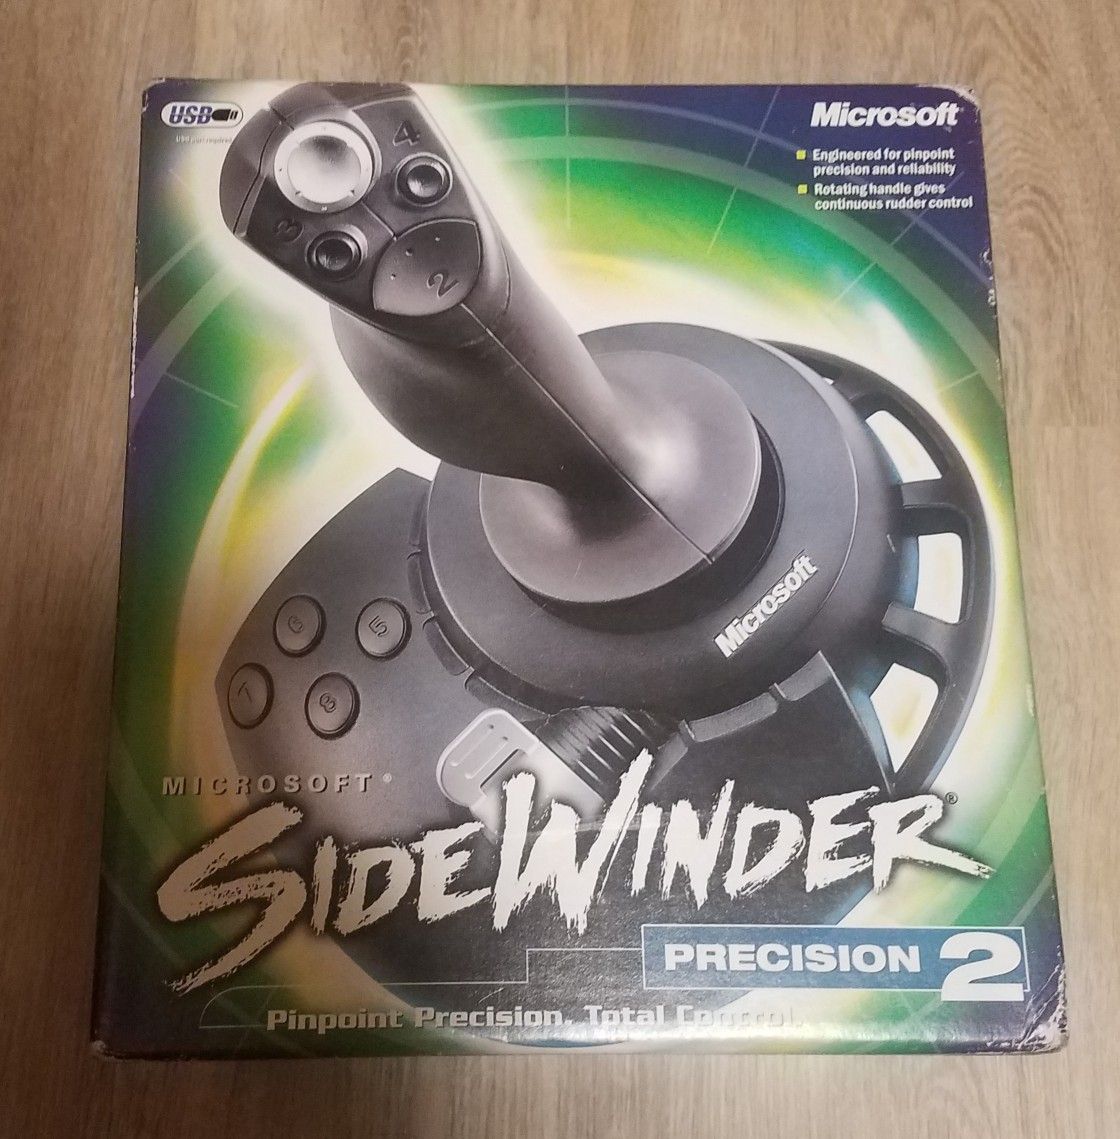 Computer Game Controller and Joystick plus The Incredibles PC Game